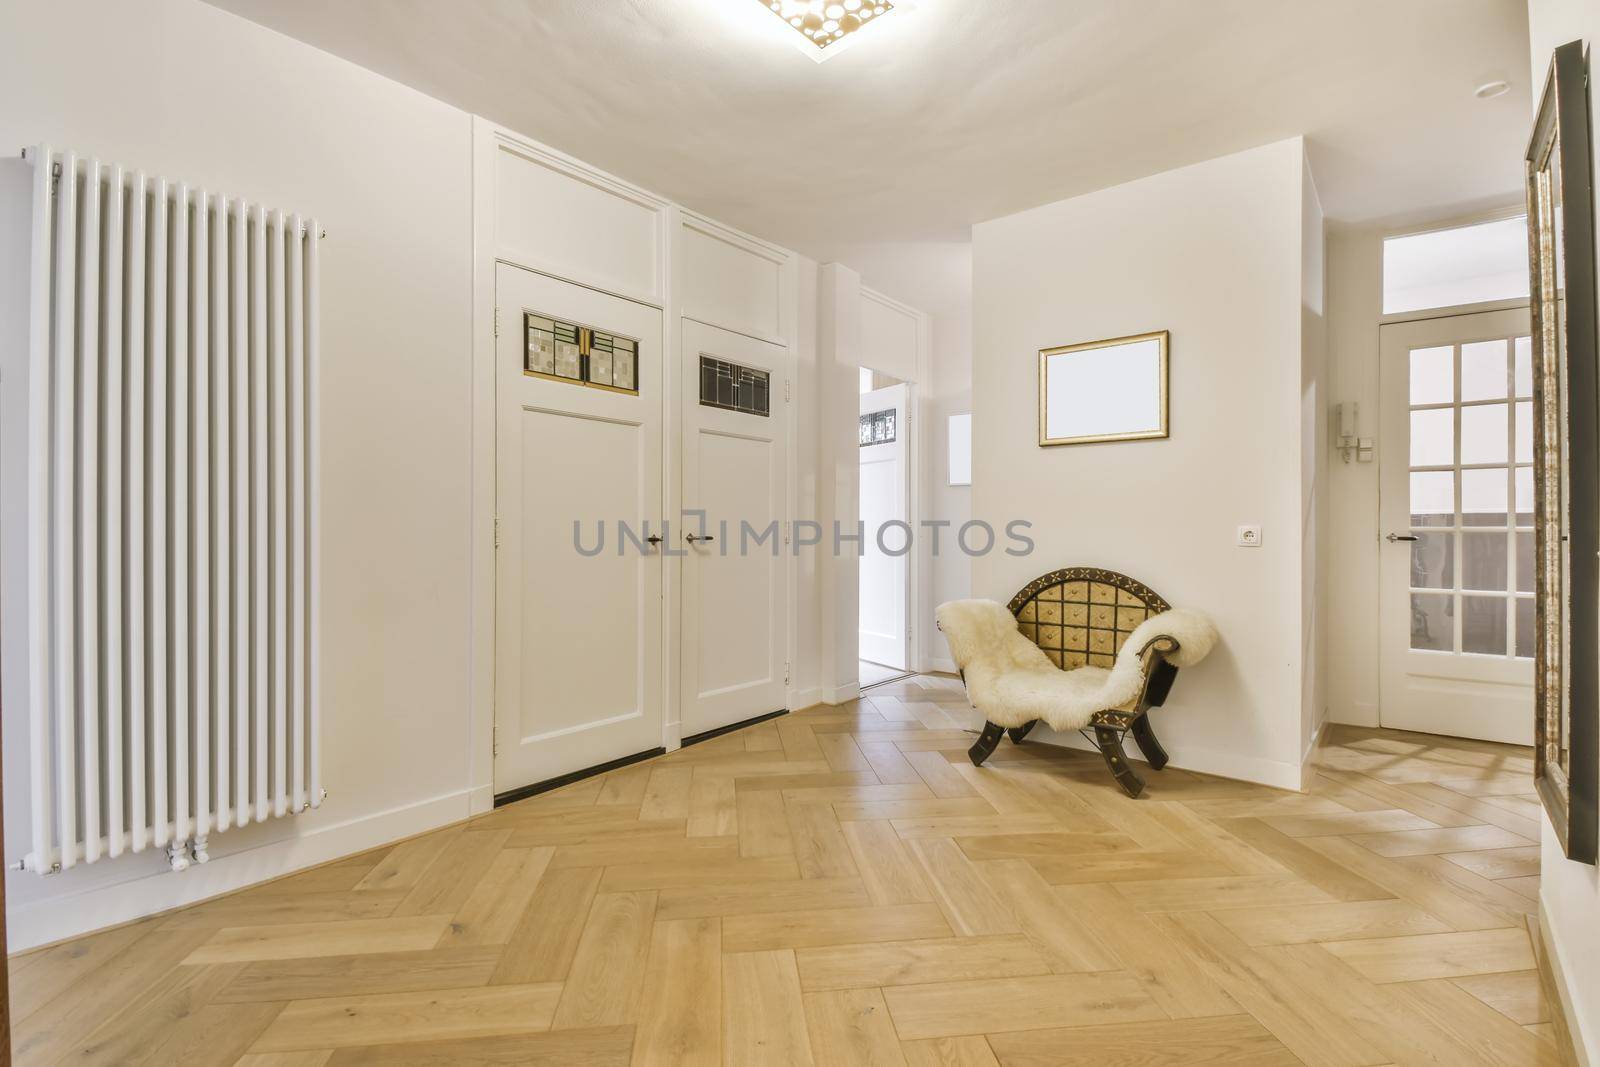 Cozy large hallway with doors to other rooms